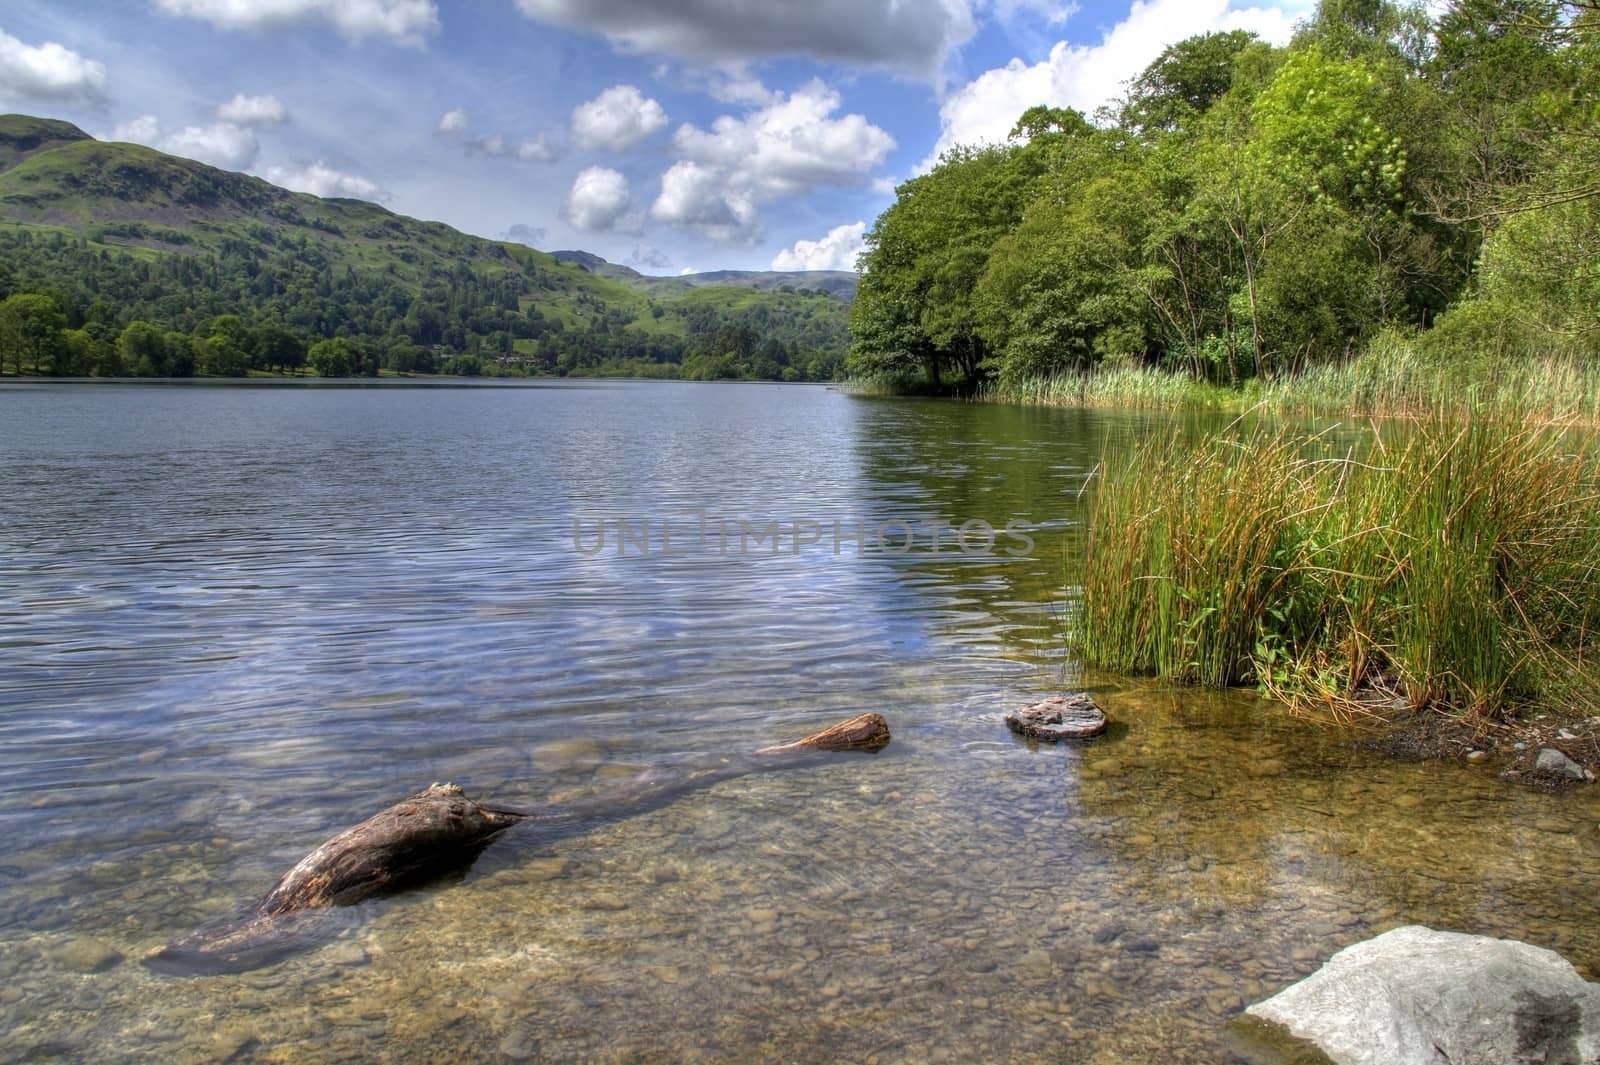 The clear waters at Grasmere, the Lake District, Cumbria, England.